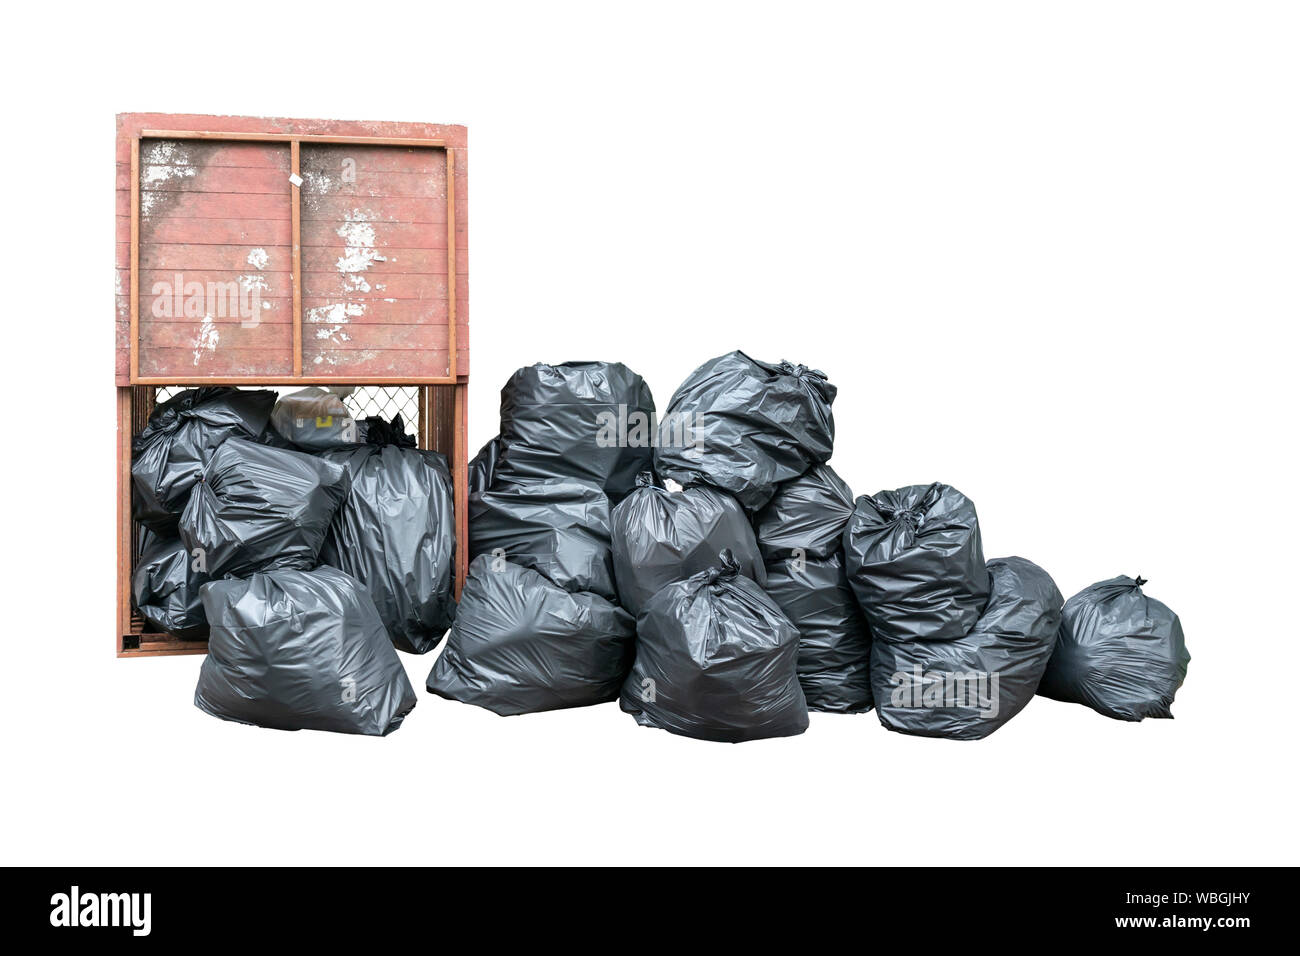 https://c8.alamy.com/comp/WBGJHY/pile-of-black-garbage-isolated-on-white-background-pile-of-garbage-plastic-black-and-trash-bag-waste-many-WBGJHY.jpg